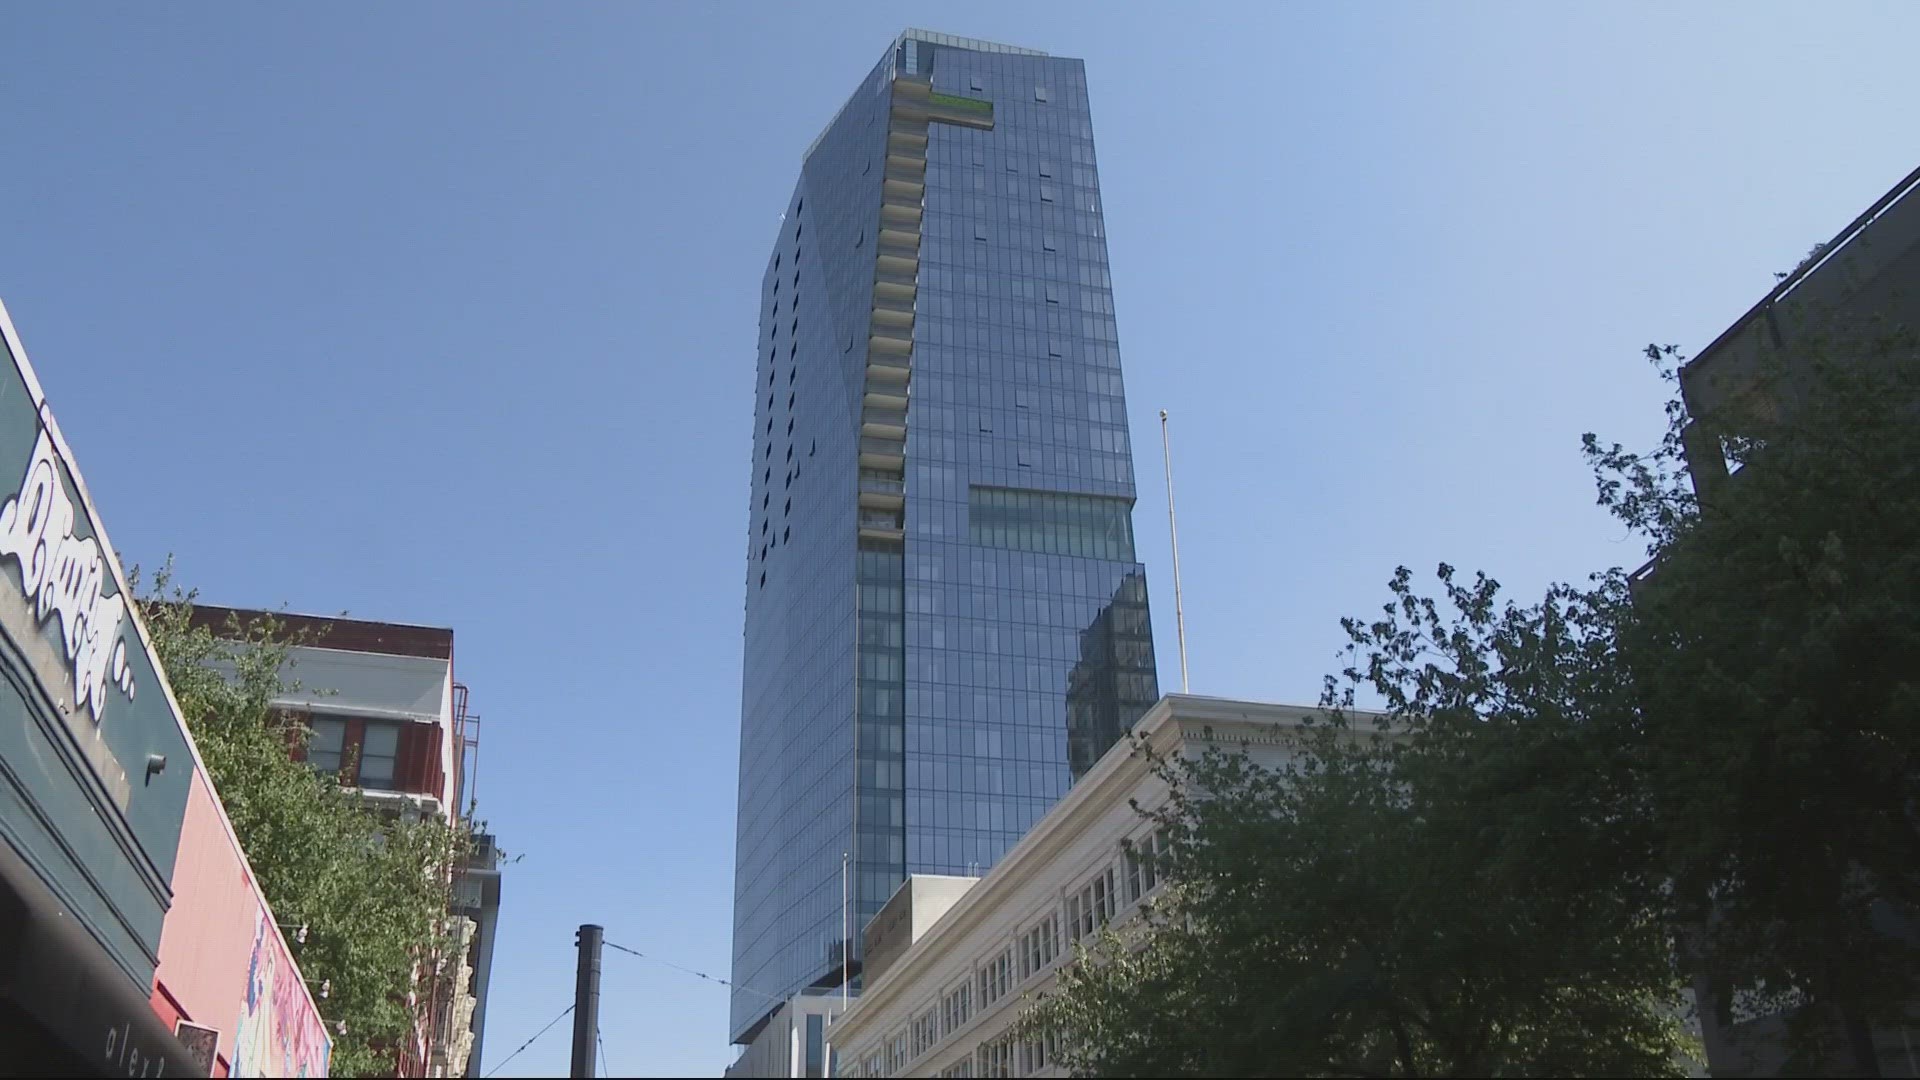 The new 35-story addition to Portland’s skyline will open in the late summer. It will be the city’s first five star hotel.